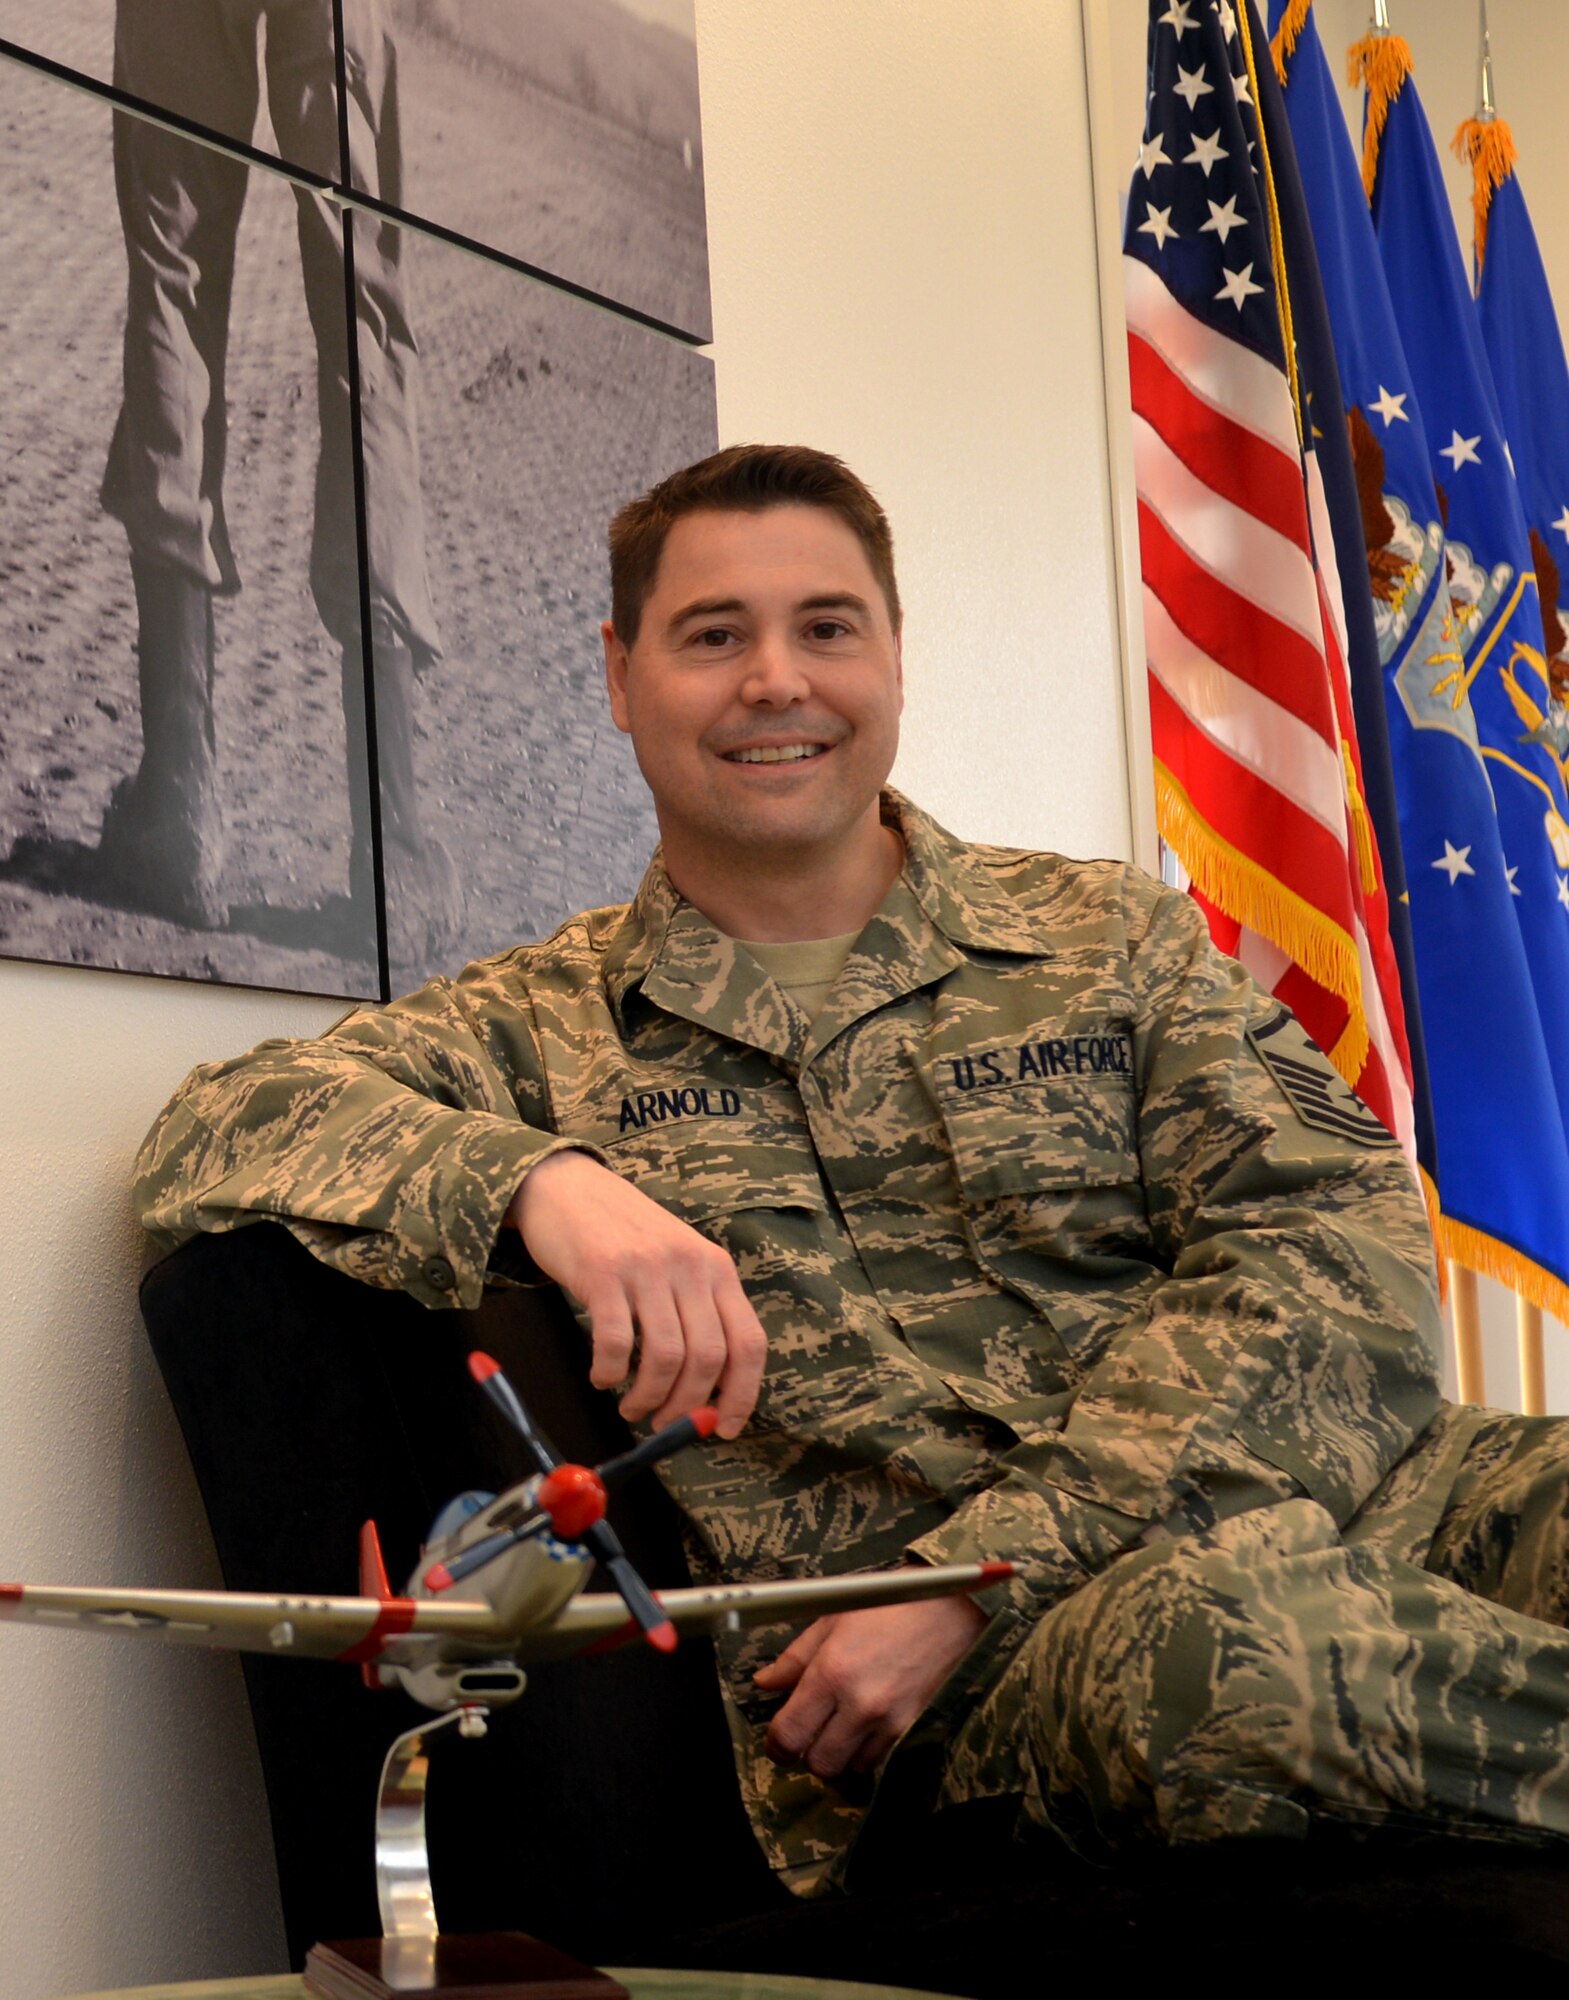 Master Sgt. Shawn Arnold, 477th Force Support Squadron first sergeant, also serves as the school superintendent in Nome, Alaska. “When I was a kid I looked up to my teachers and I looked up to my parents and was proud of their service in the military,” said Arnold. “Thankfully the Reserve allows me to do both.”